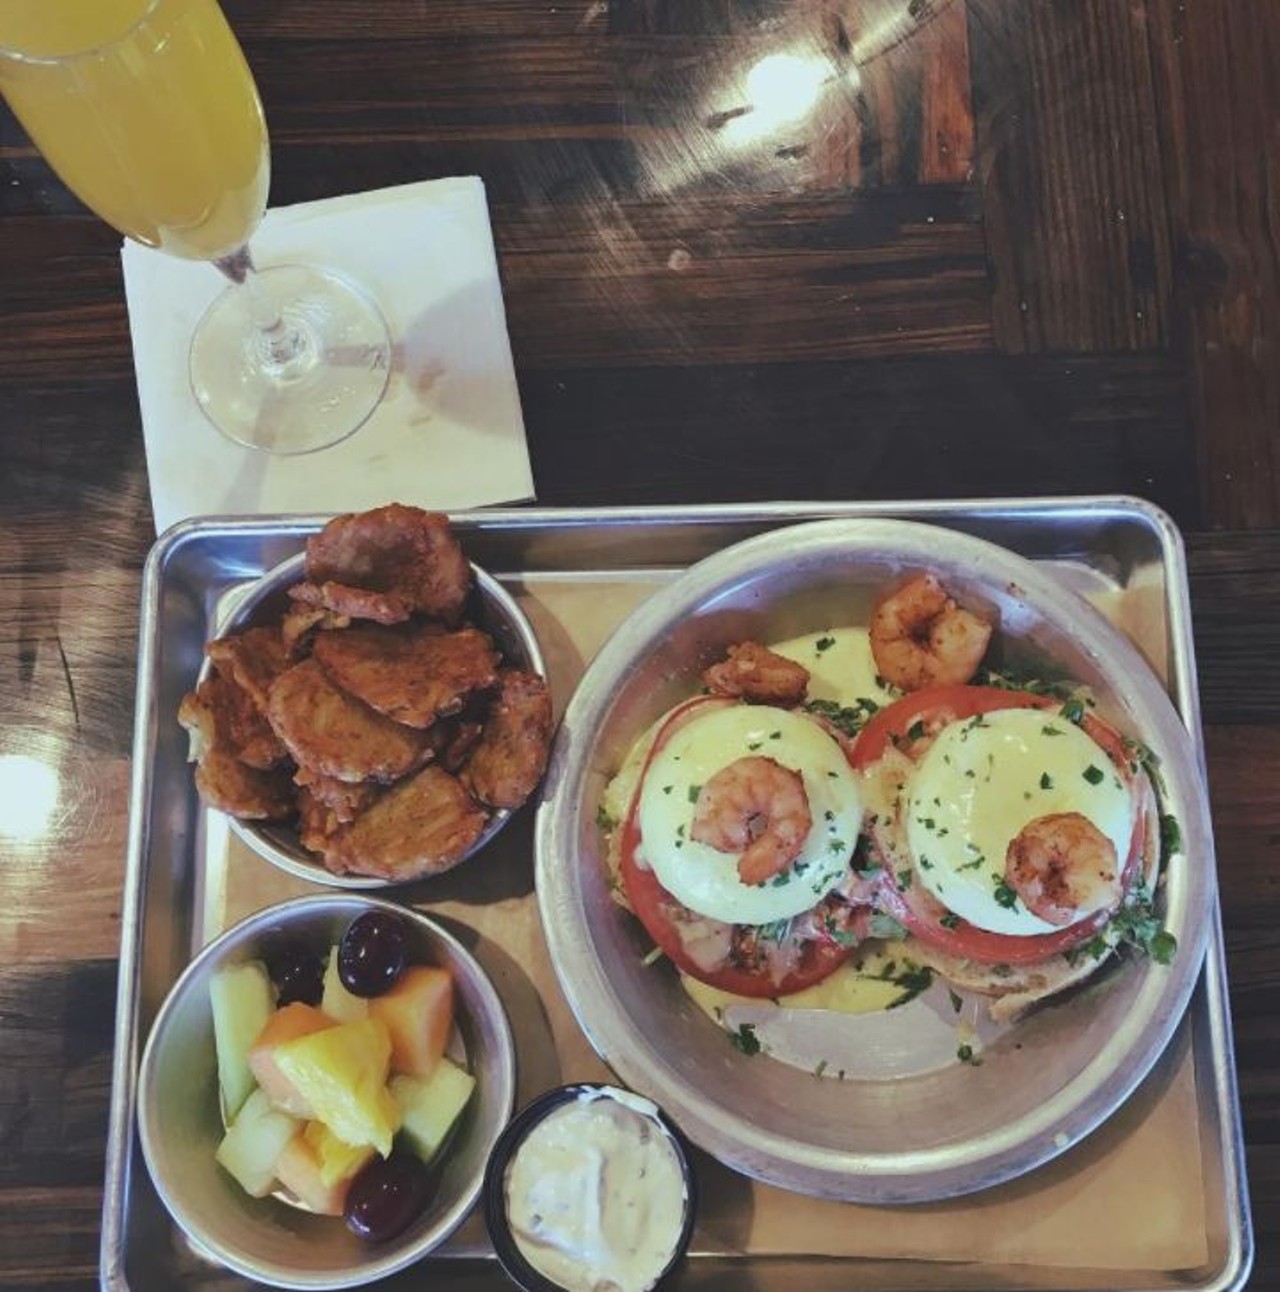 Social House Orlando 
When you've finished your weekend shopping in Waterford Lakes, stop by the Social House between 11 a.m. and 3 p.m. and treat yourself to $11.99 mimosas.
435 N. Alafaya Trail, 407-906-9001
Photo via kdeeznuts/Instagram